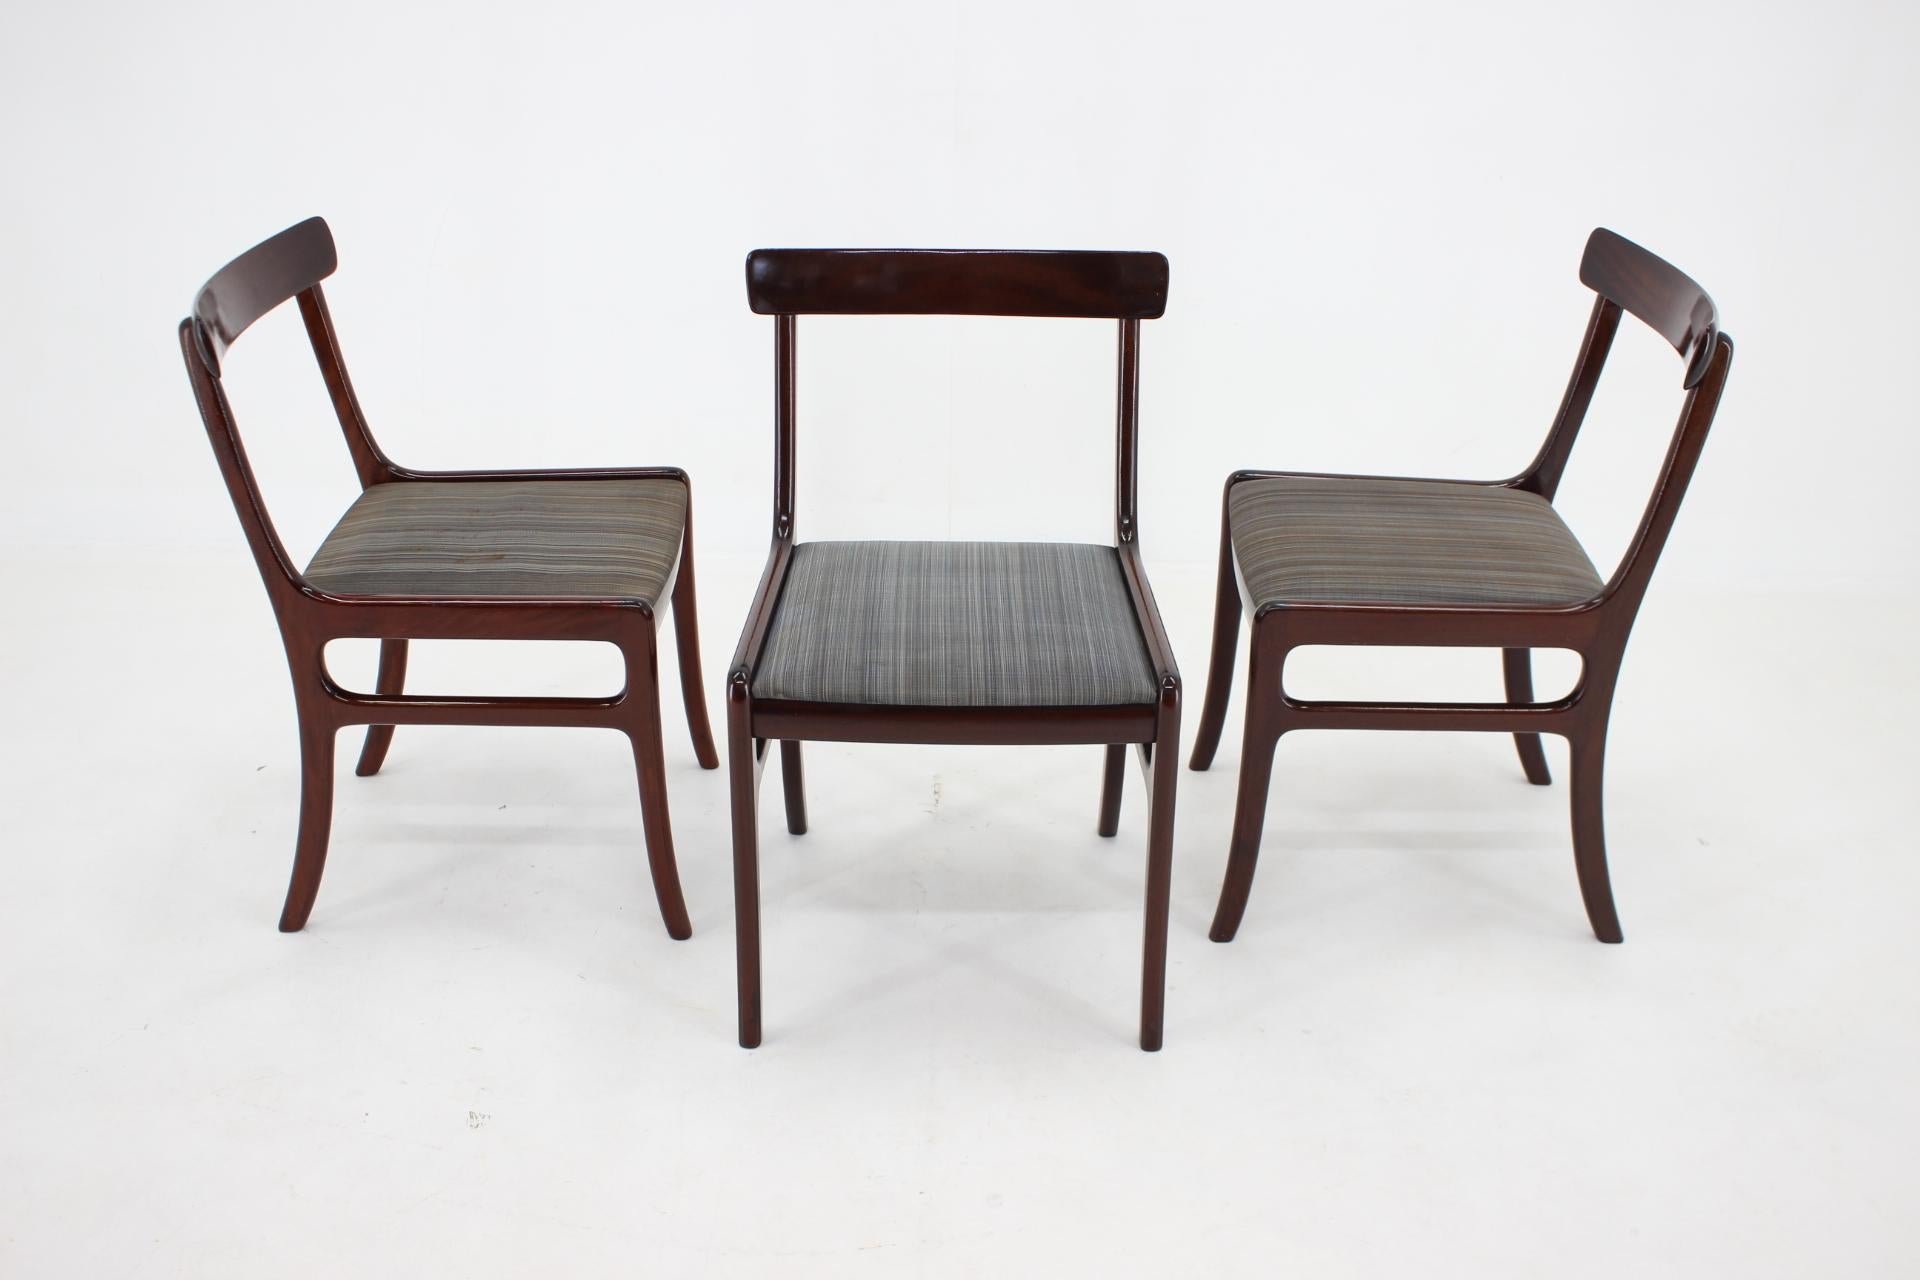 Danish 1950s Ole Wanscher Rungstedlund Chairs in Mahogany Denmark, Set of 5 For Sale